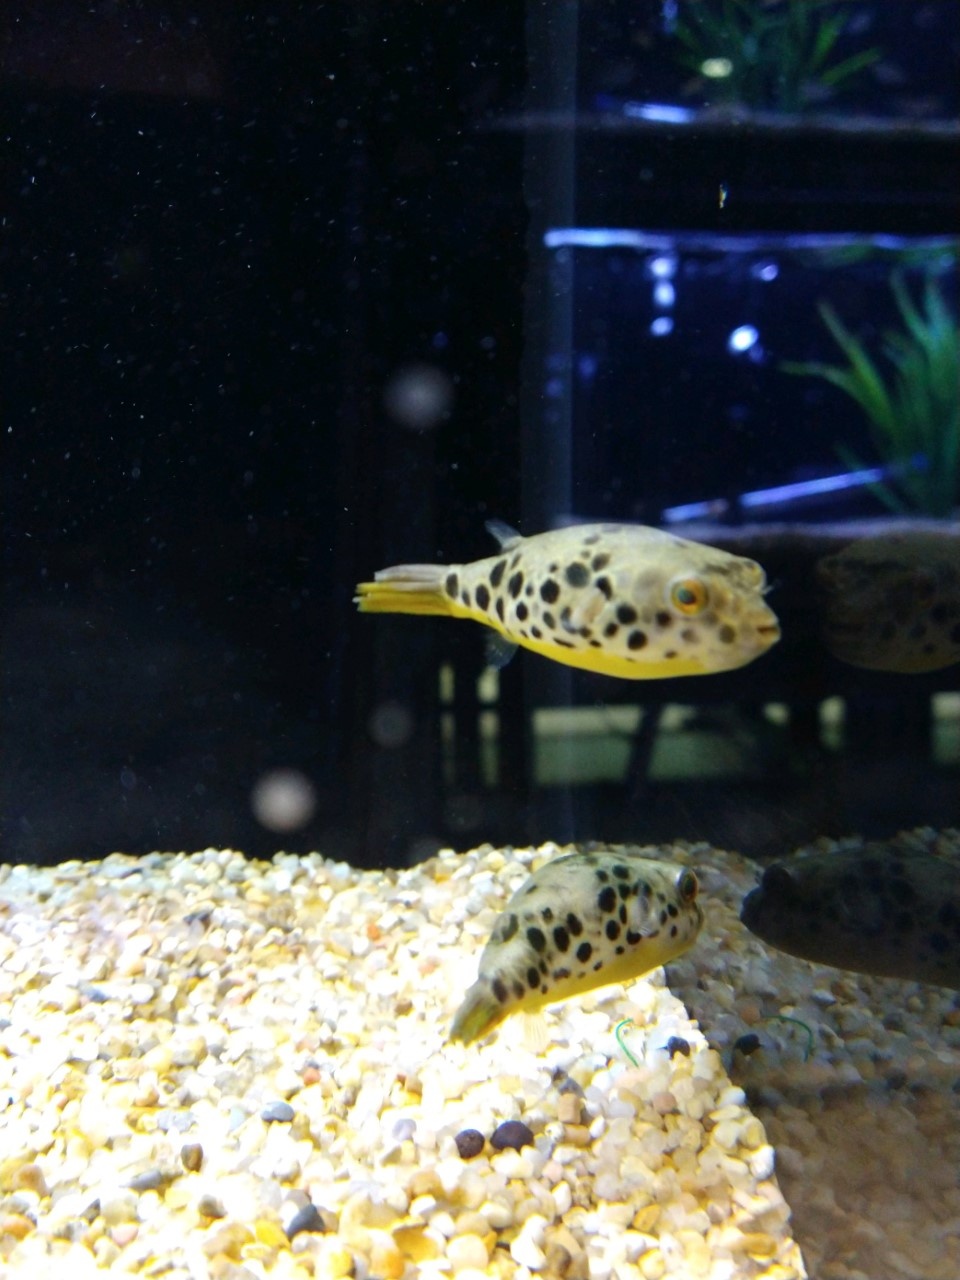 New Arrivals - Fish Gallery Woodlands - 11/19/21